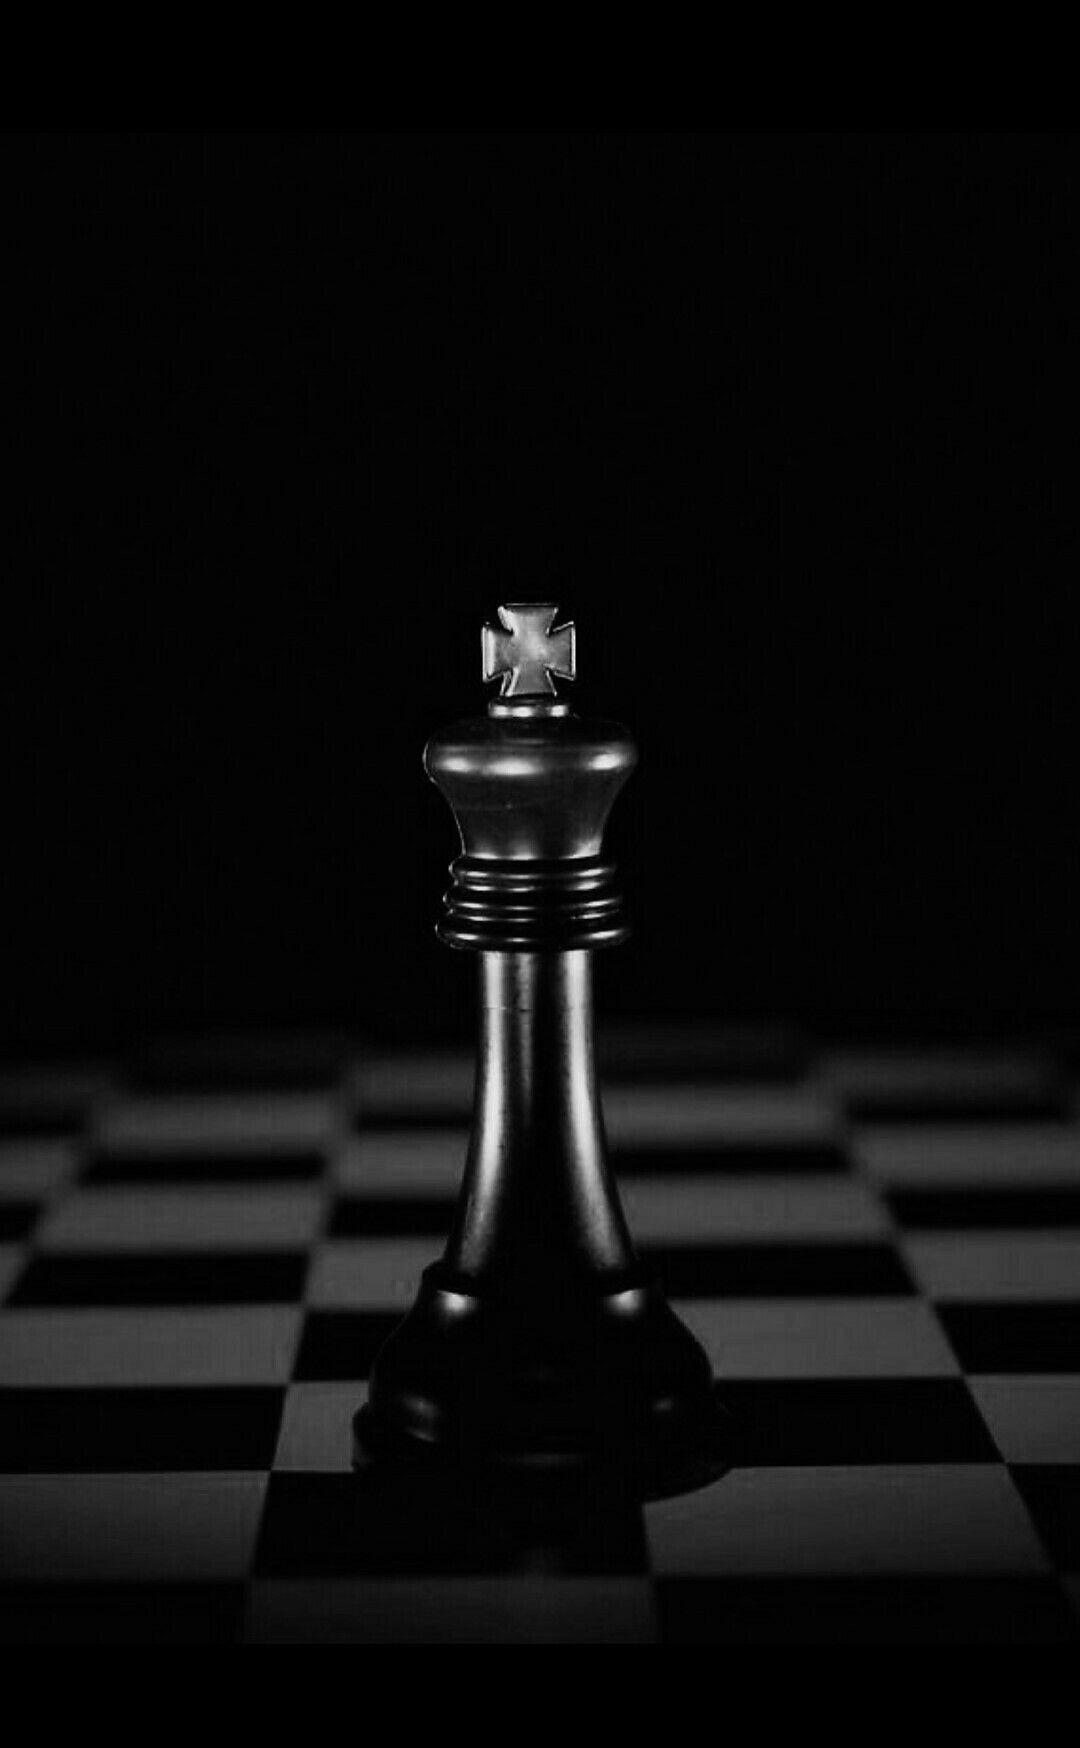 Chess Game IPhone Wallpaper HD - IPhone Wallpapers : iPhone Wallpapers